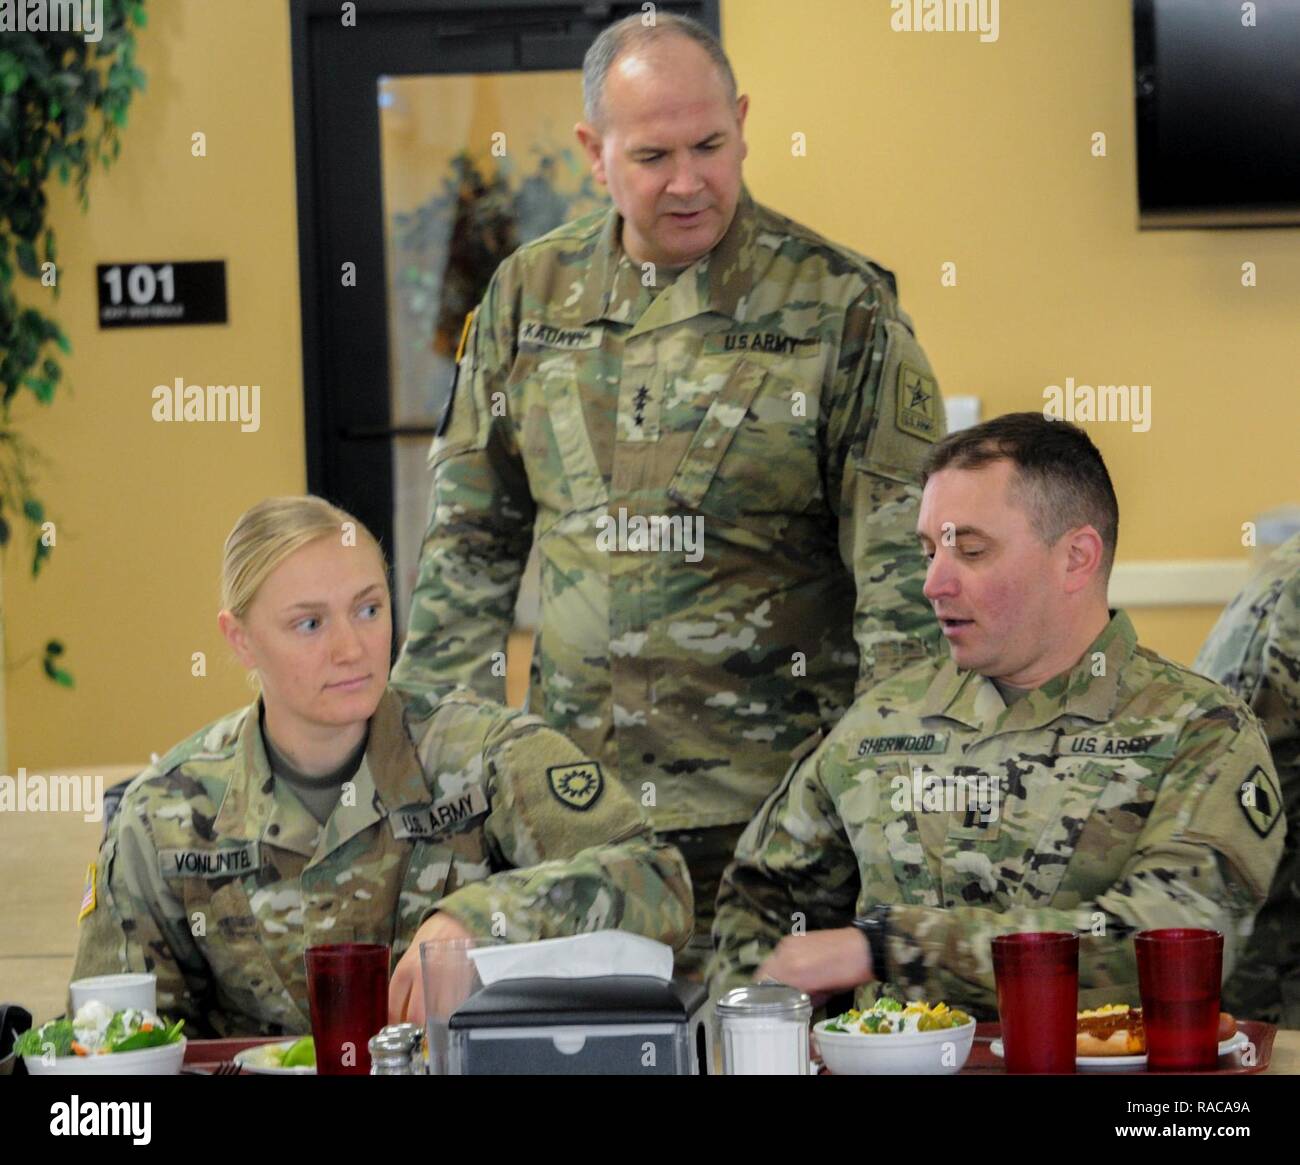 The Director of the Army National Guard, Lieutenant General Tim Kadavy visited the Soldiers at Camp McGregor, New Mexico on January 19,2017. The purpose of his visit was to see the training the National Guard hosts on the installation and to make sure that the Soldiers are ready for the deployment. LG Kadavy said he was “impressed with the operations and 1-53 Infantry Regiment looked well trained with quality leaders”. Stock Photo